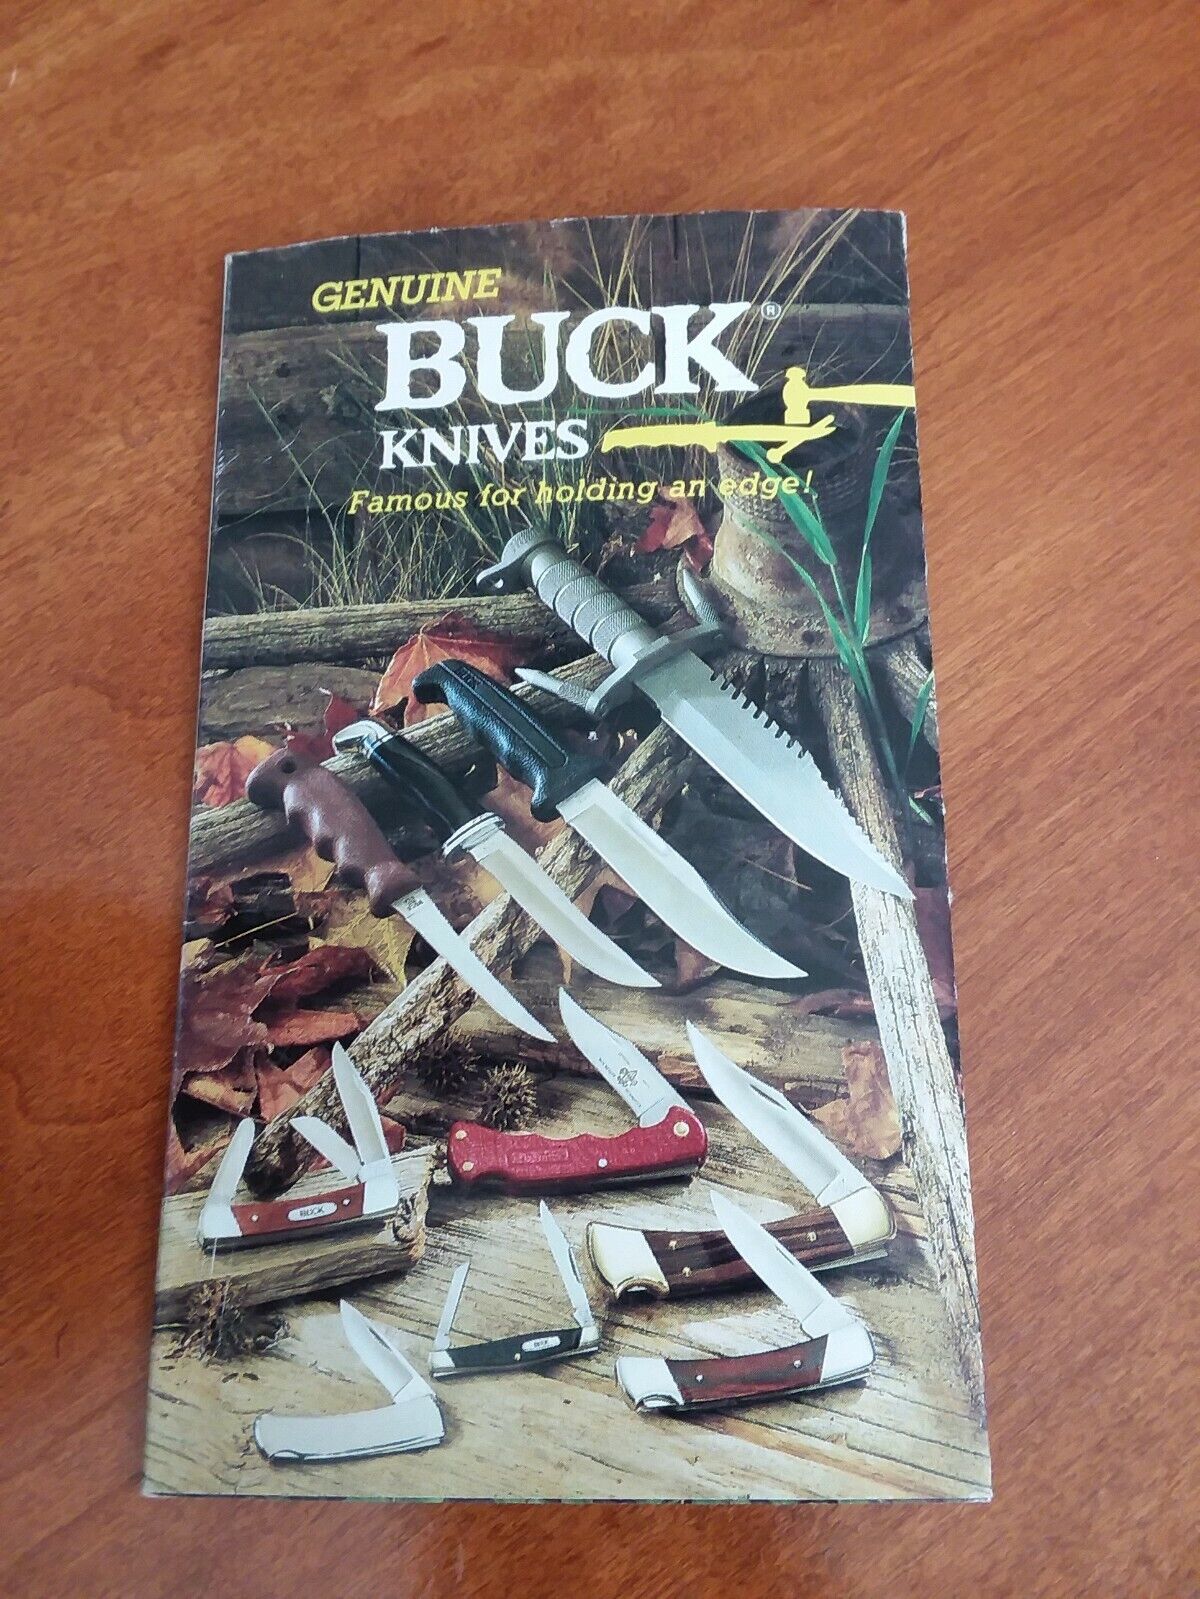 Vintage “Buck Knives” Advertising Booklet / Guide / Pamphlet Printed USA 1986 